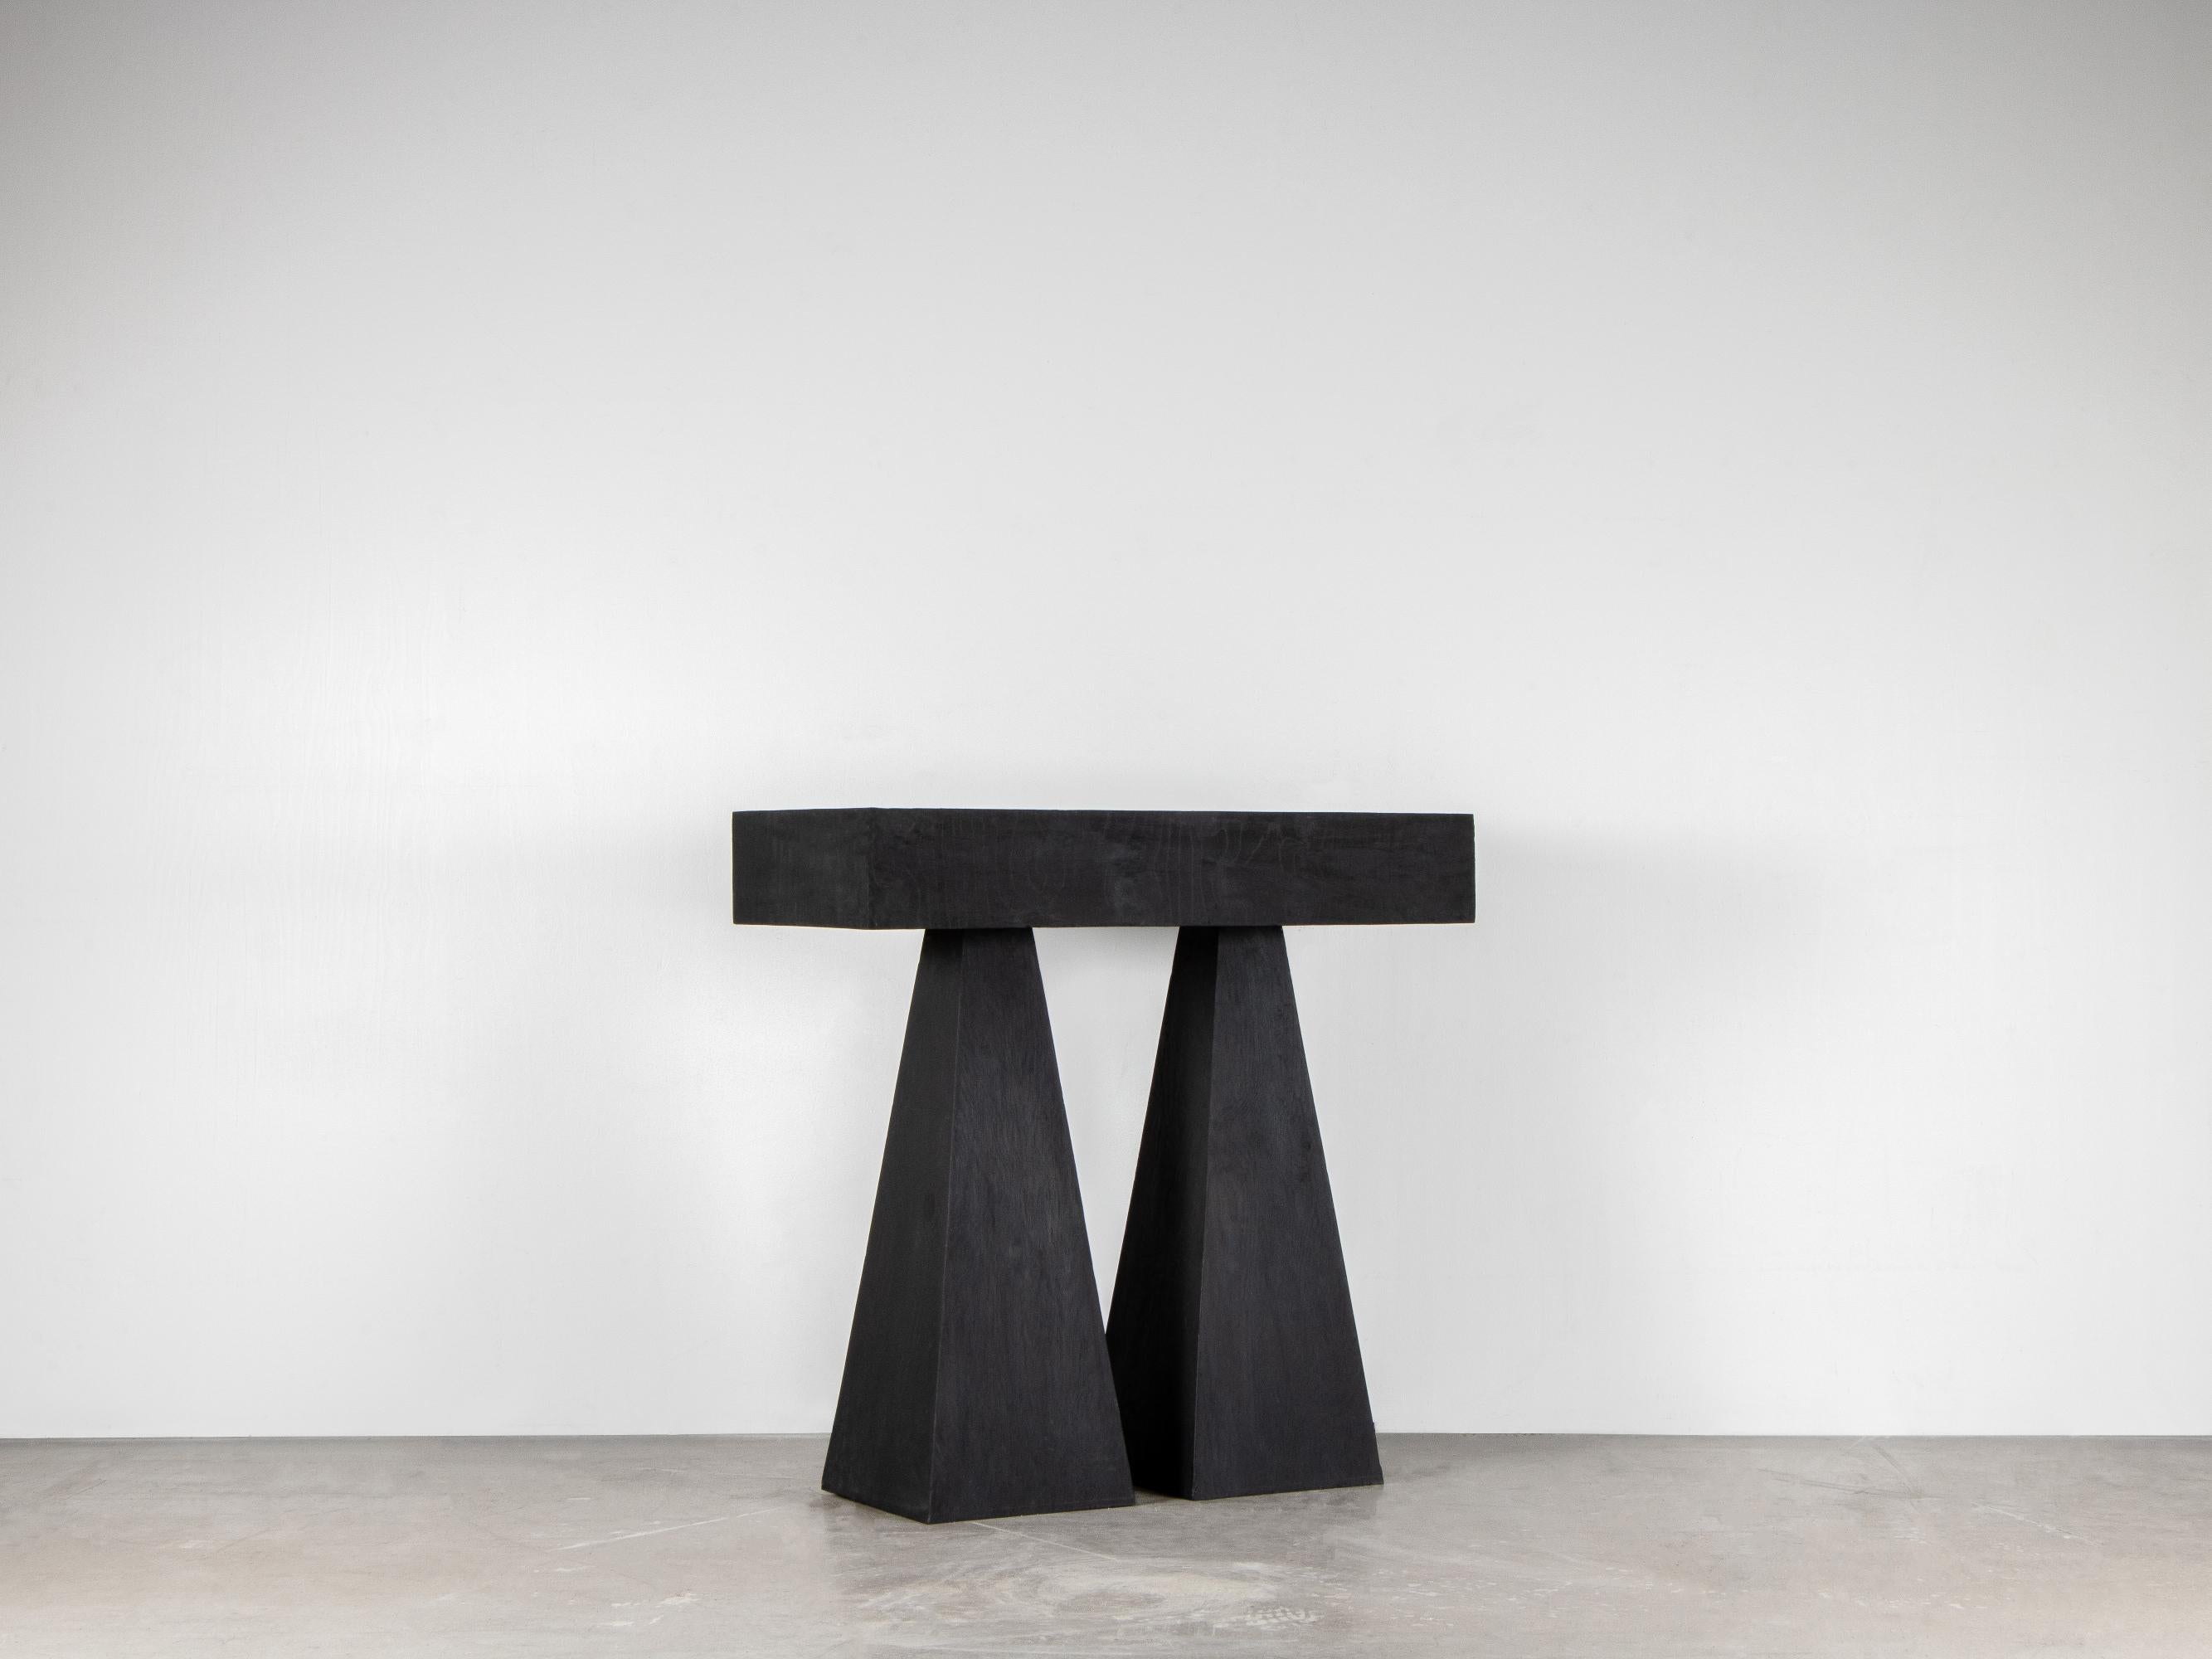 Torn high console table by Lucas Morten
2018
Limited Edition of 29
Dimensions: W 90.5, H 89, D 40
Material: handwaxed plywood

Torn table with its two individual legs symbolizes the constant struggle to maintain the right equilibrium between